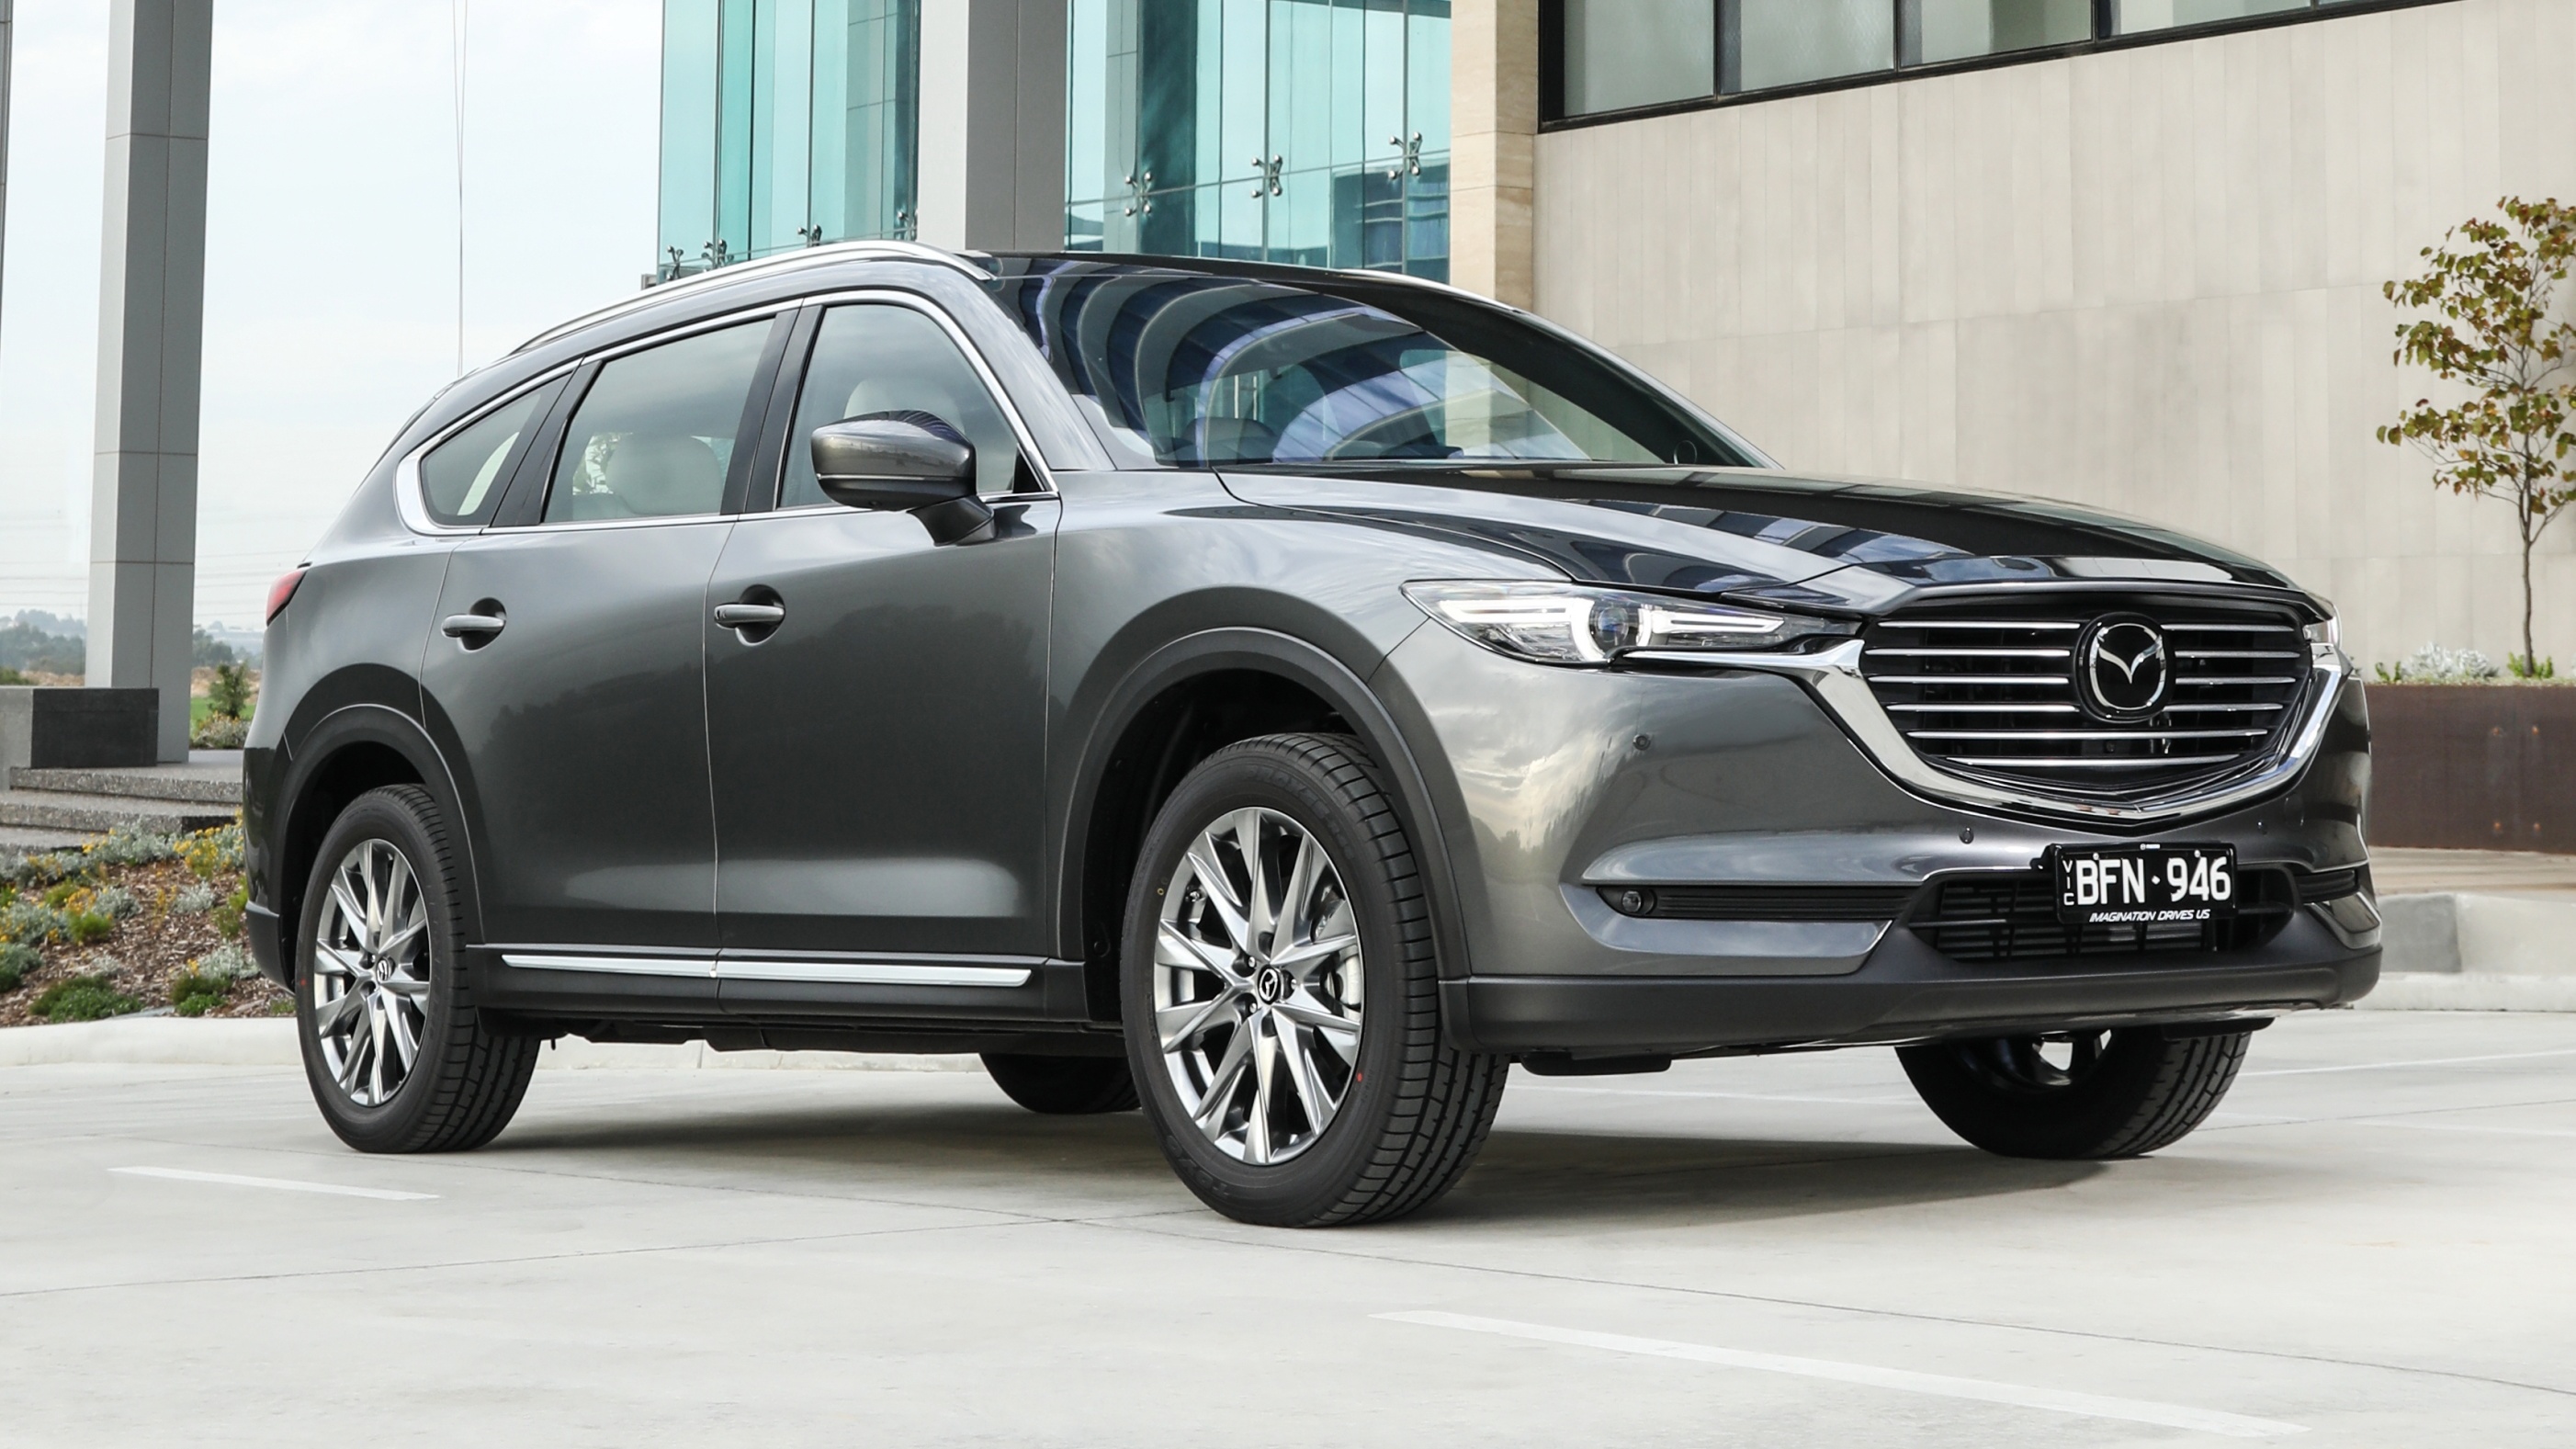 News - Mazda CX-8 Lineup Refreshed For 2020, Five New Variants Starting